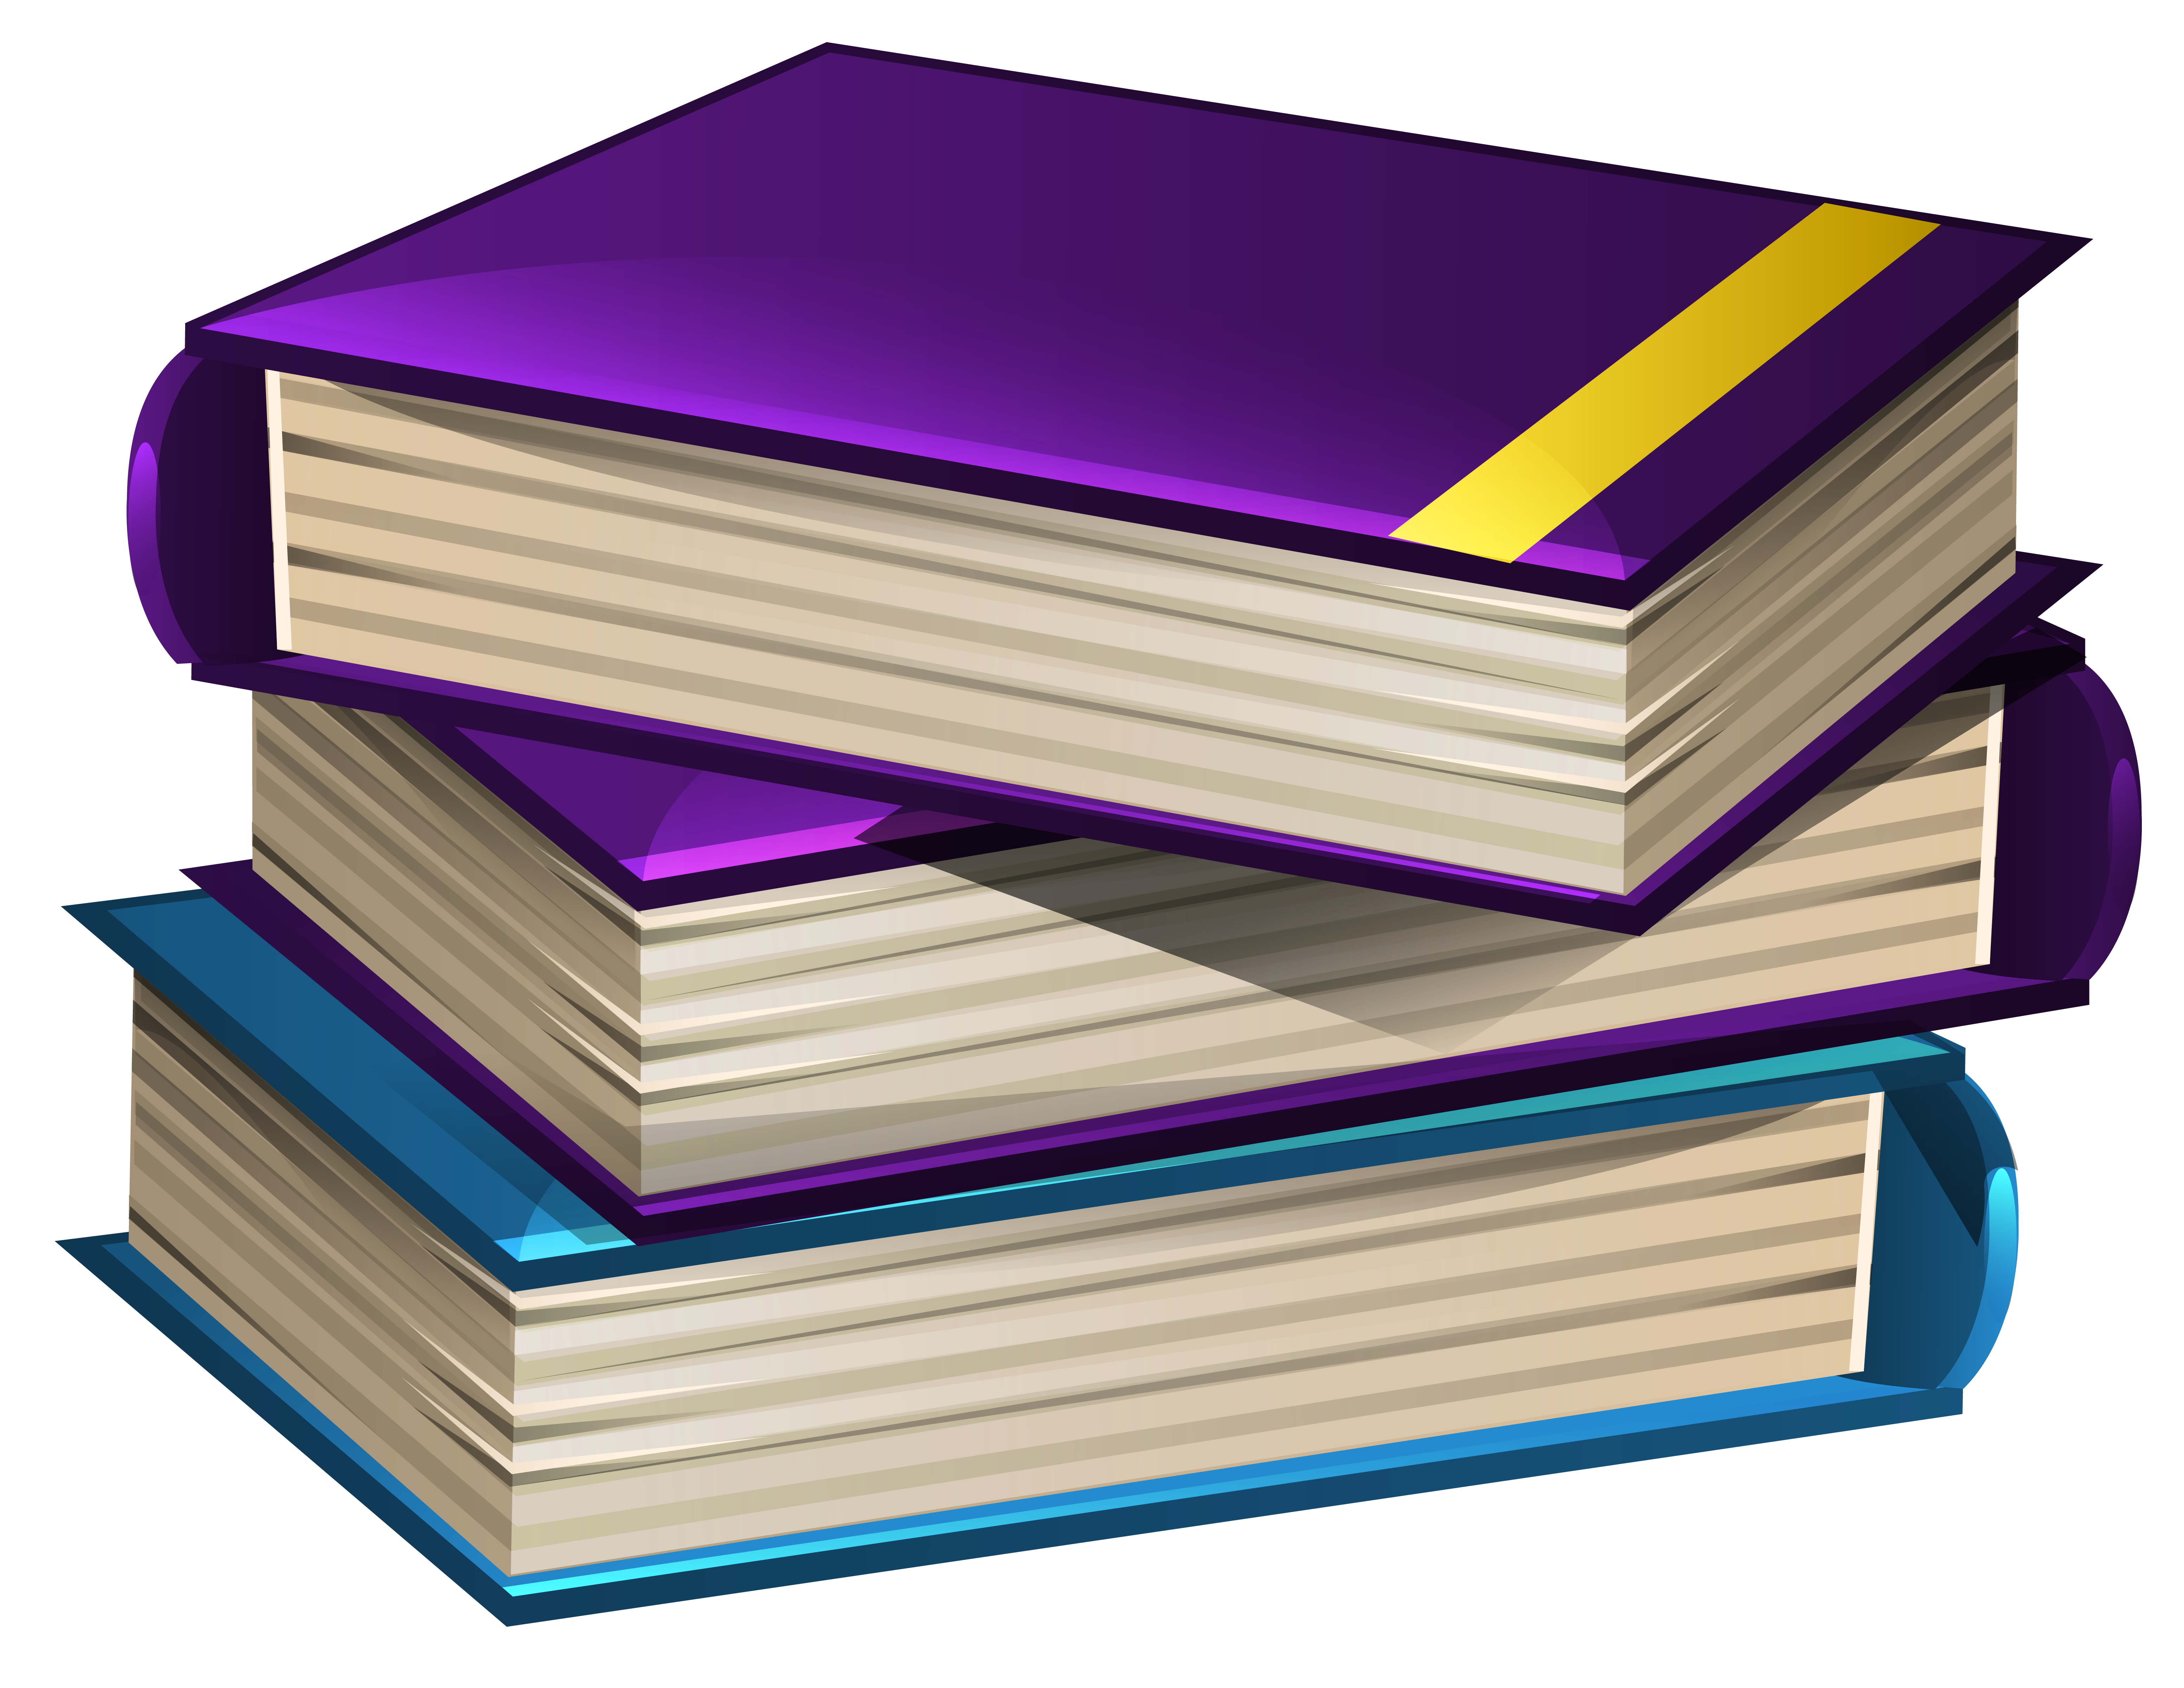 school-books-png-clipart-image-png-download-6216-4804-free